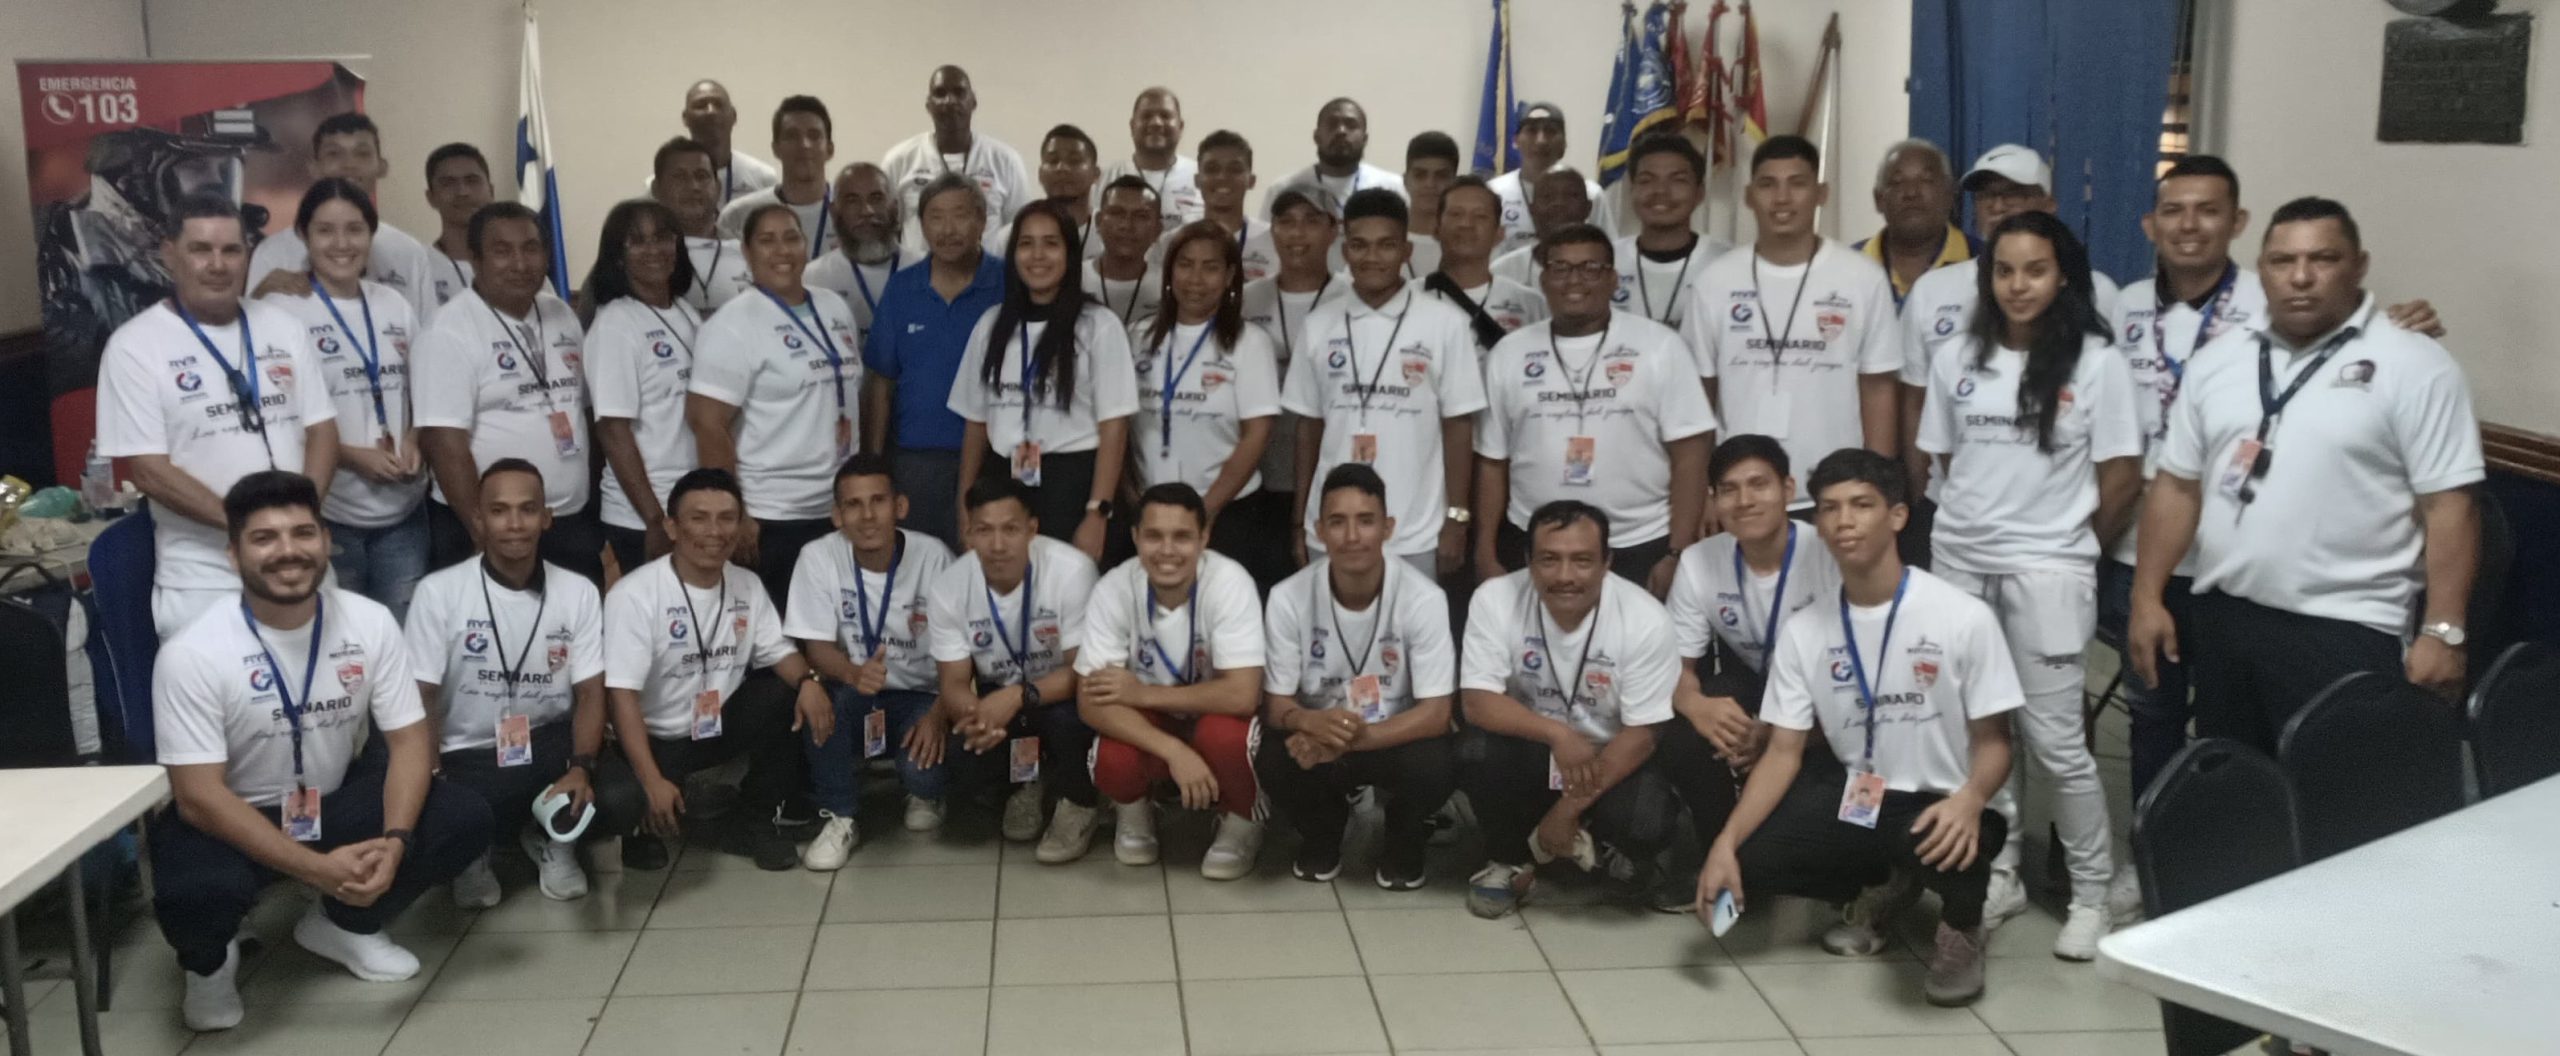 Rules of the Game Update Seminar for Referees in Panama